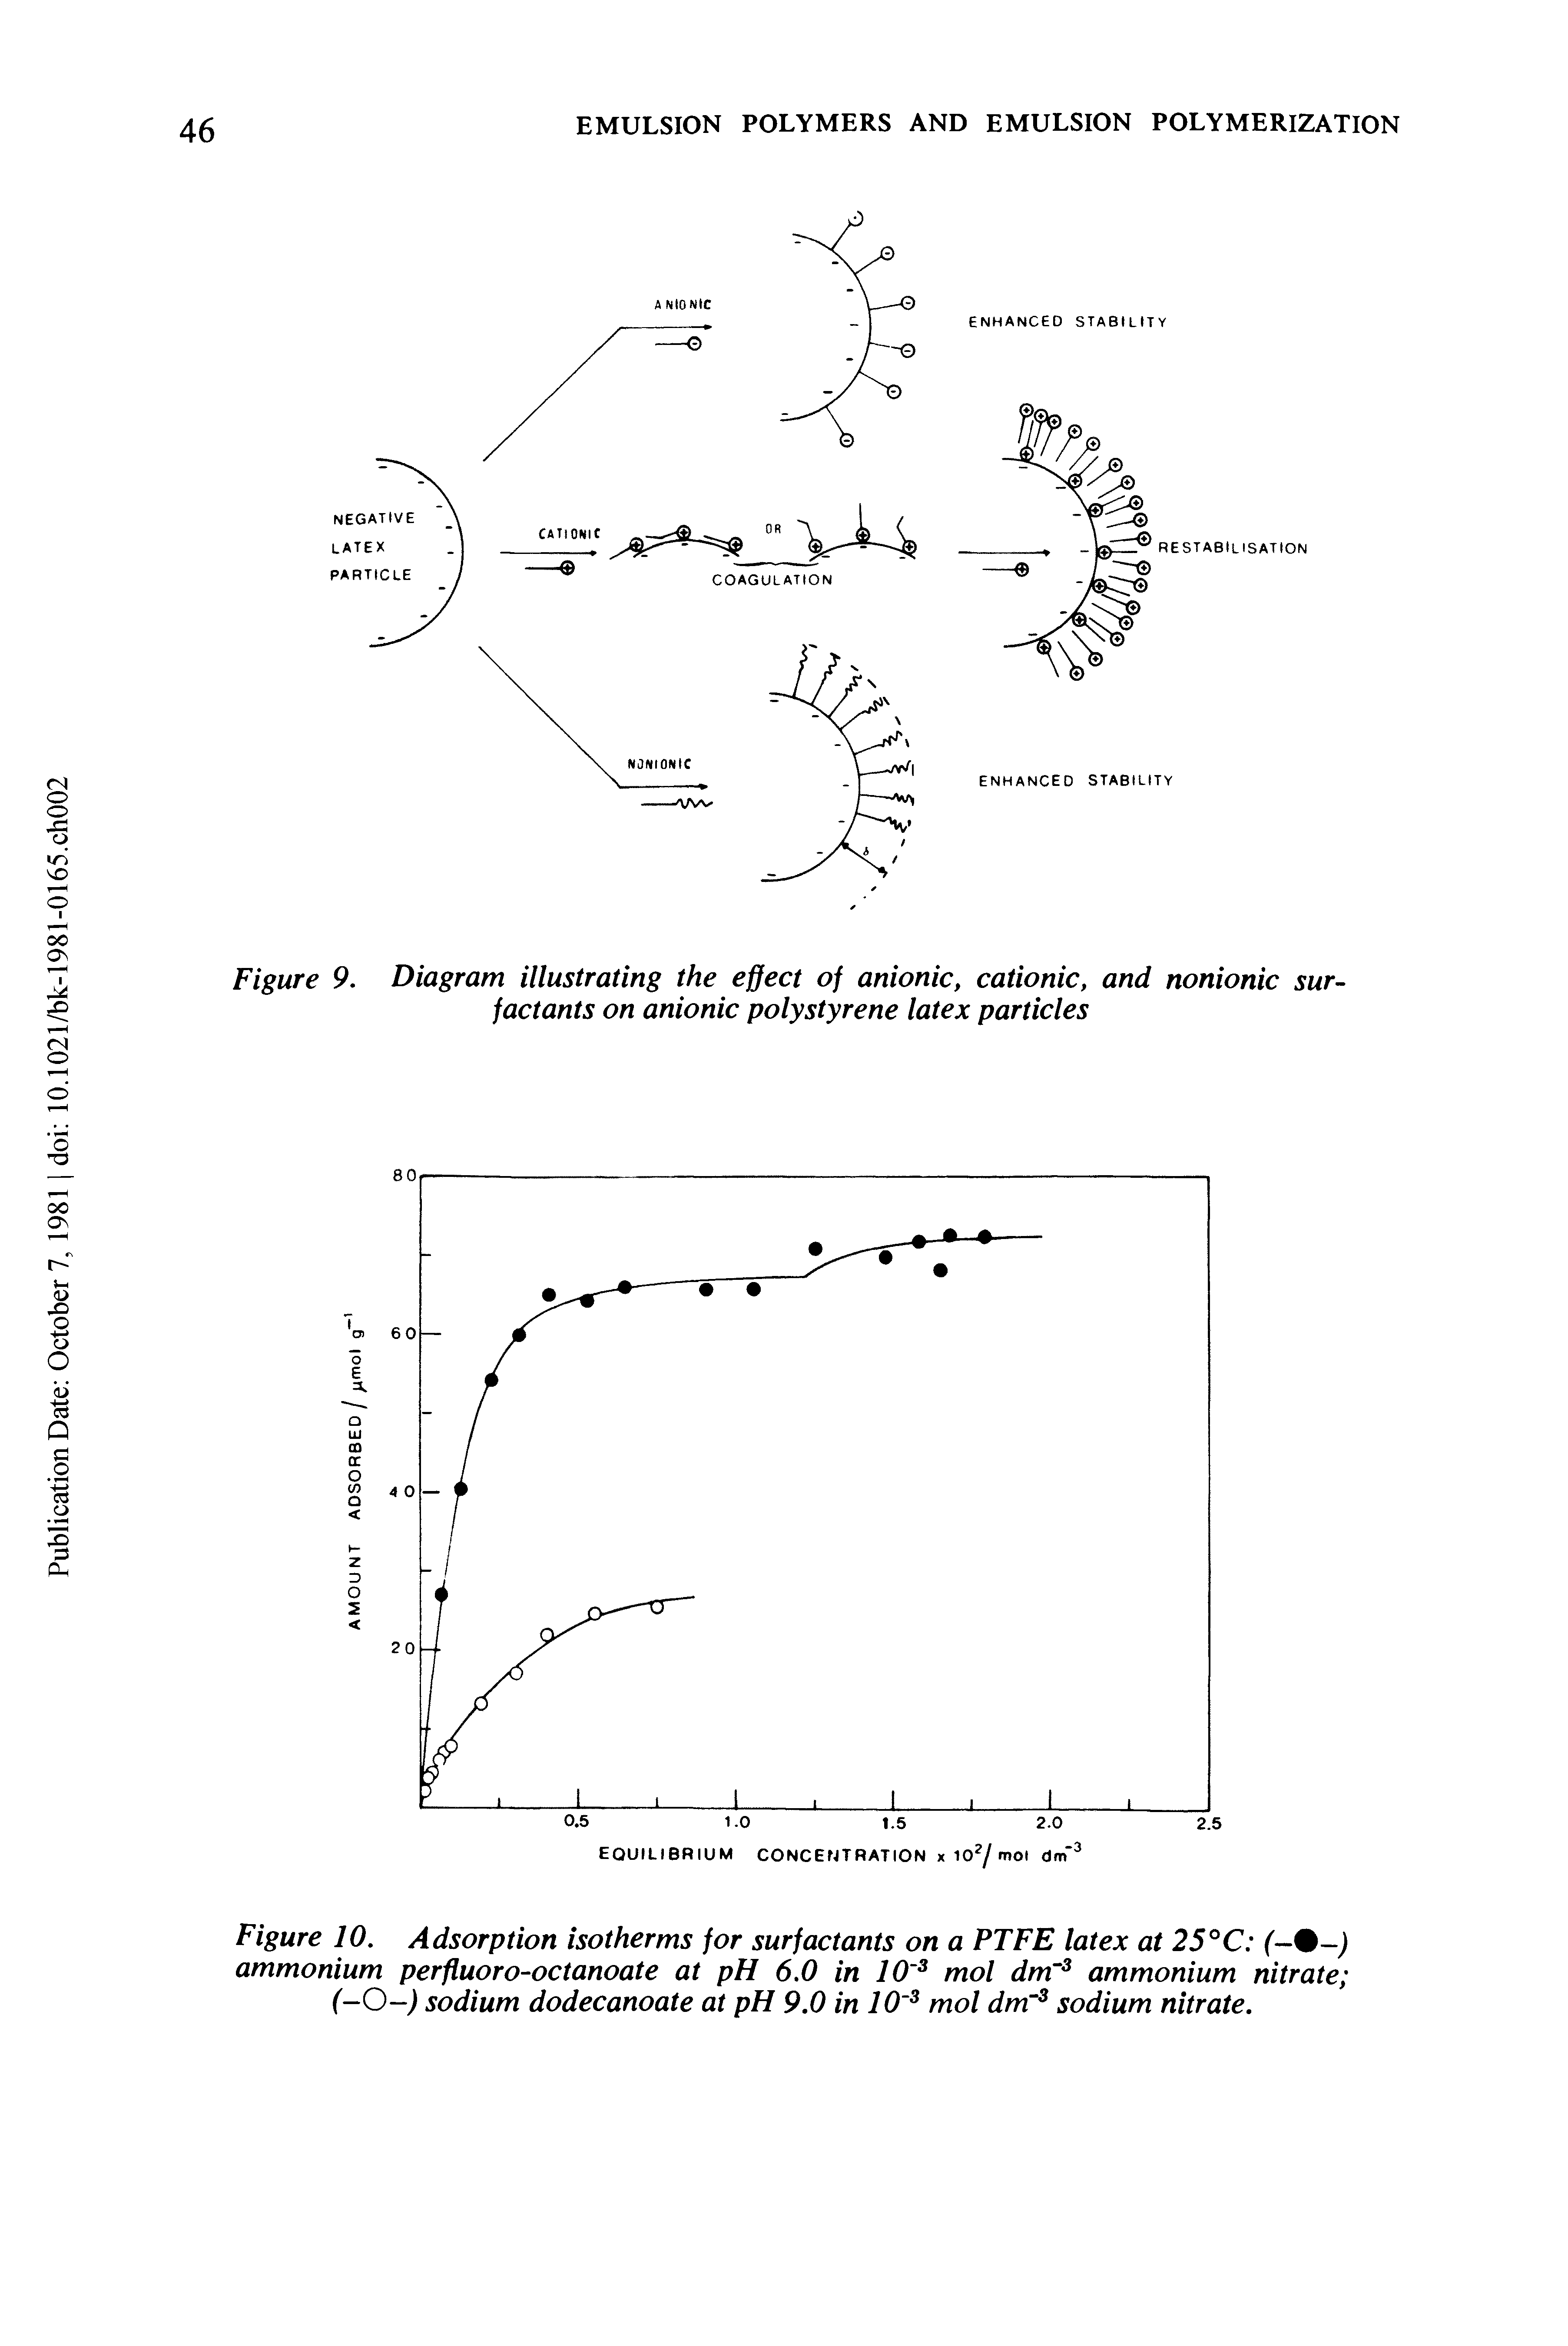 Figure 10. Adsorption isotherms for surfactants on a PTFE latex at 25°C (-%-) ammonium perfluoro-octanoate at pH 6.0 in 10 3 mol dm"3 ammonium nitrate (-O-) sodium dodecanoate at pH 9.0 in 10 3 mol dm"3 sodium nitrate.